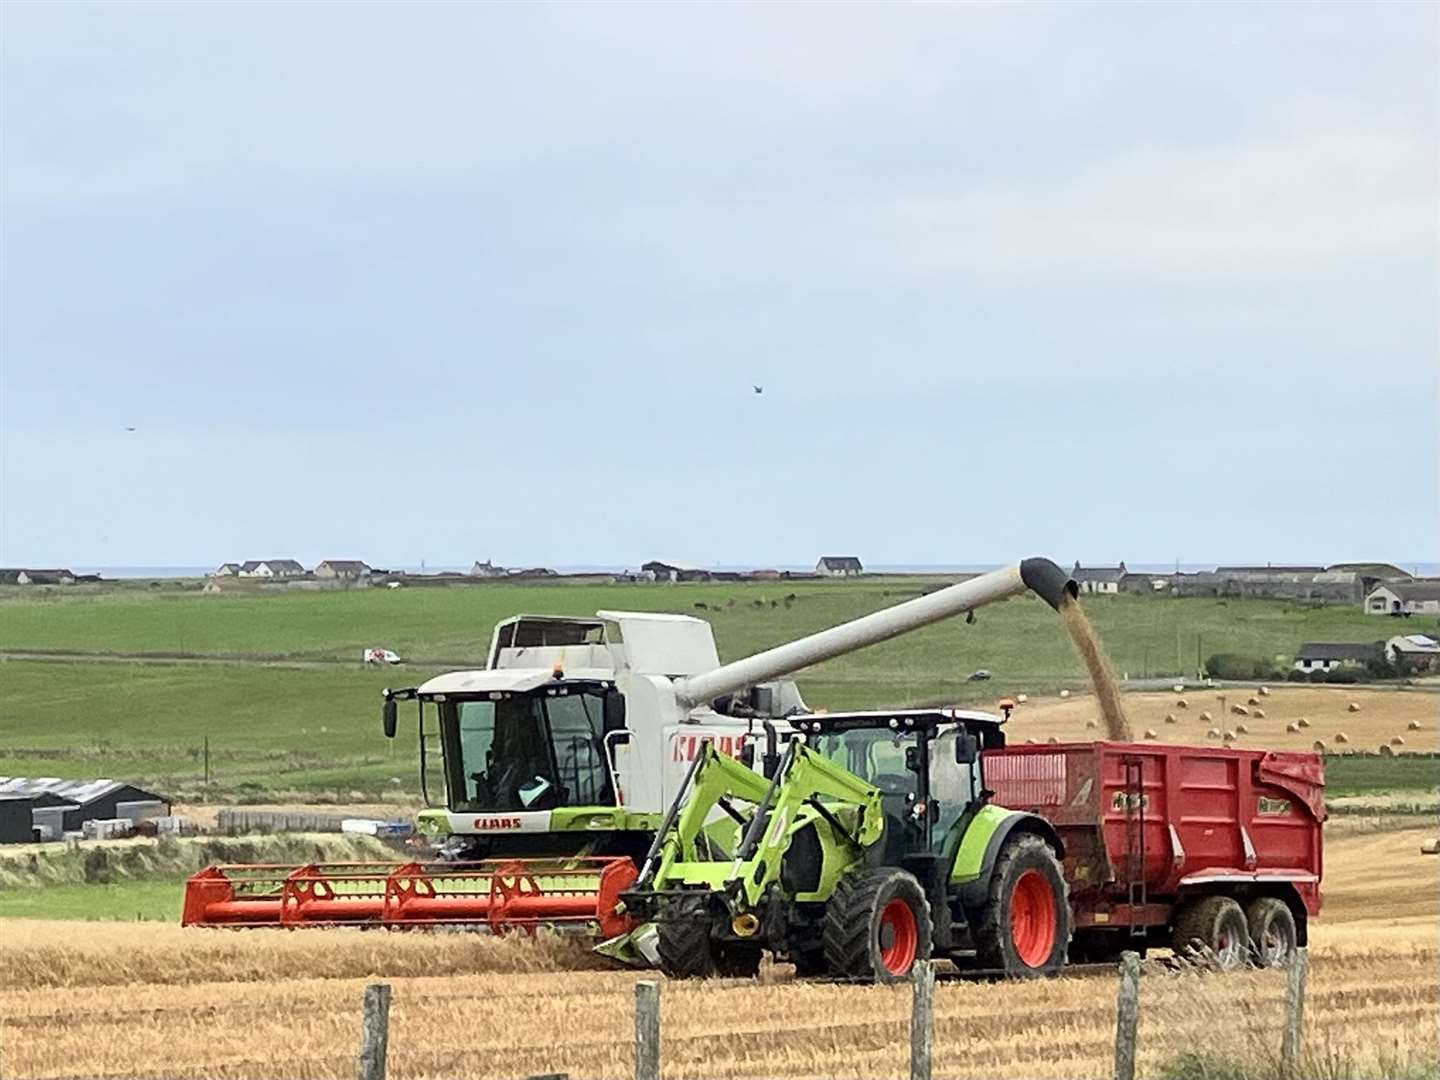 Roger Bamfield sent this photograph which he explained shows Caithness industry in harvesting the oats on one of the fields at Charity Farm. ‘The tractor was being skilfully driven by a lad making the most of his school being closed because of the strike days,’ Roger added.